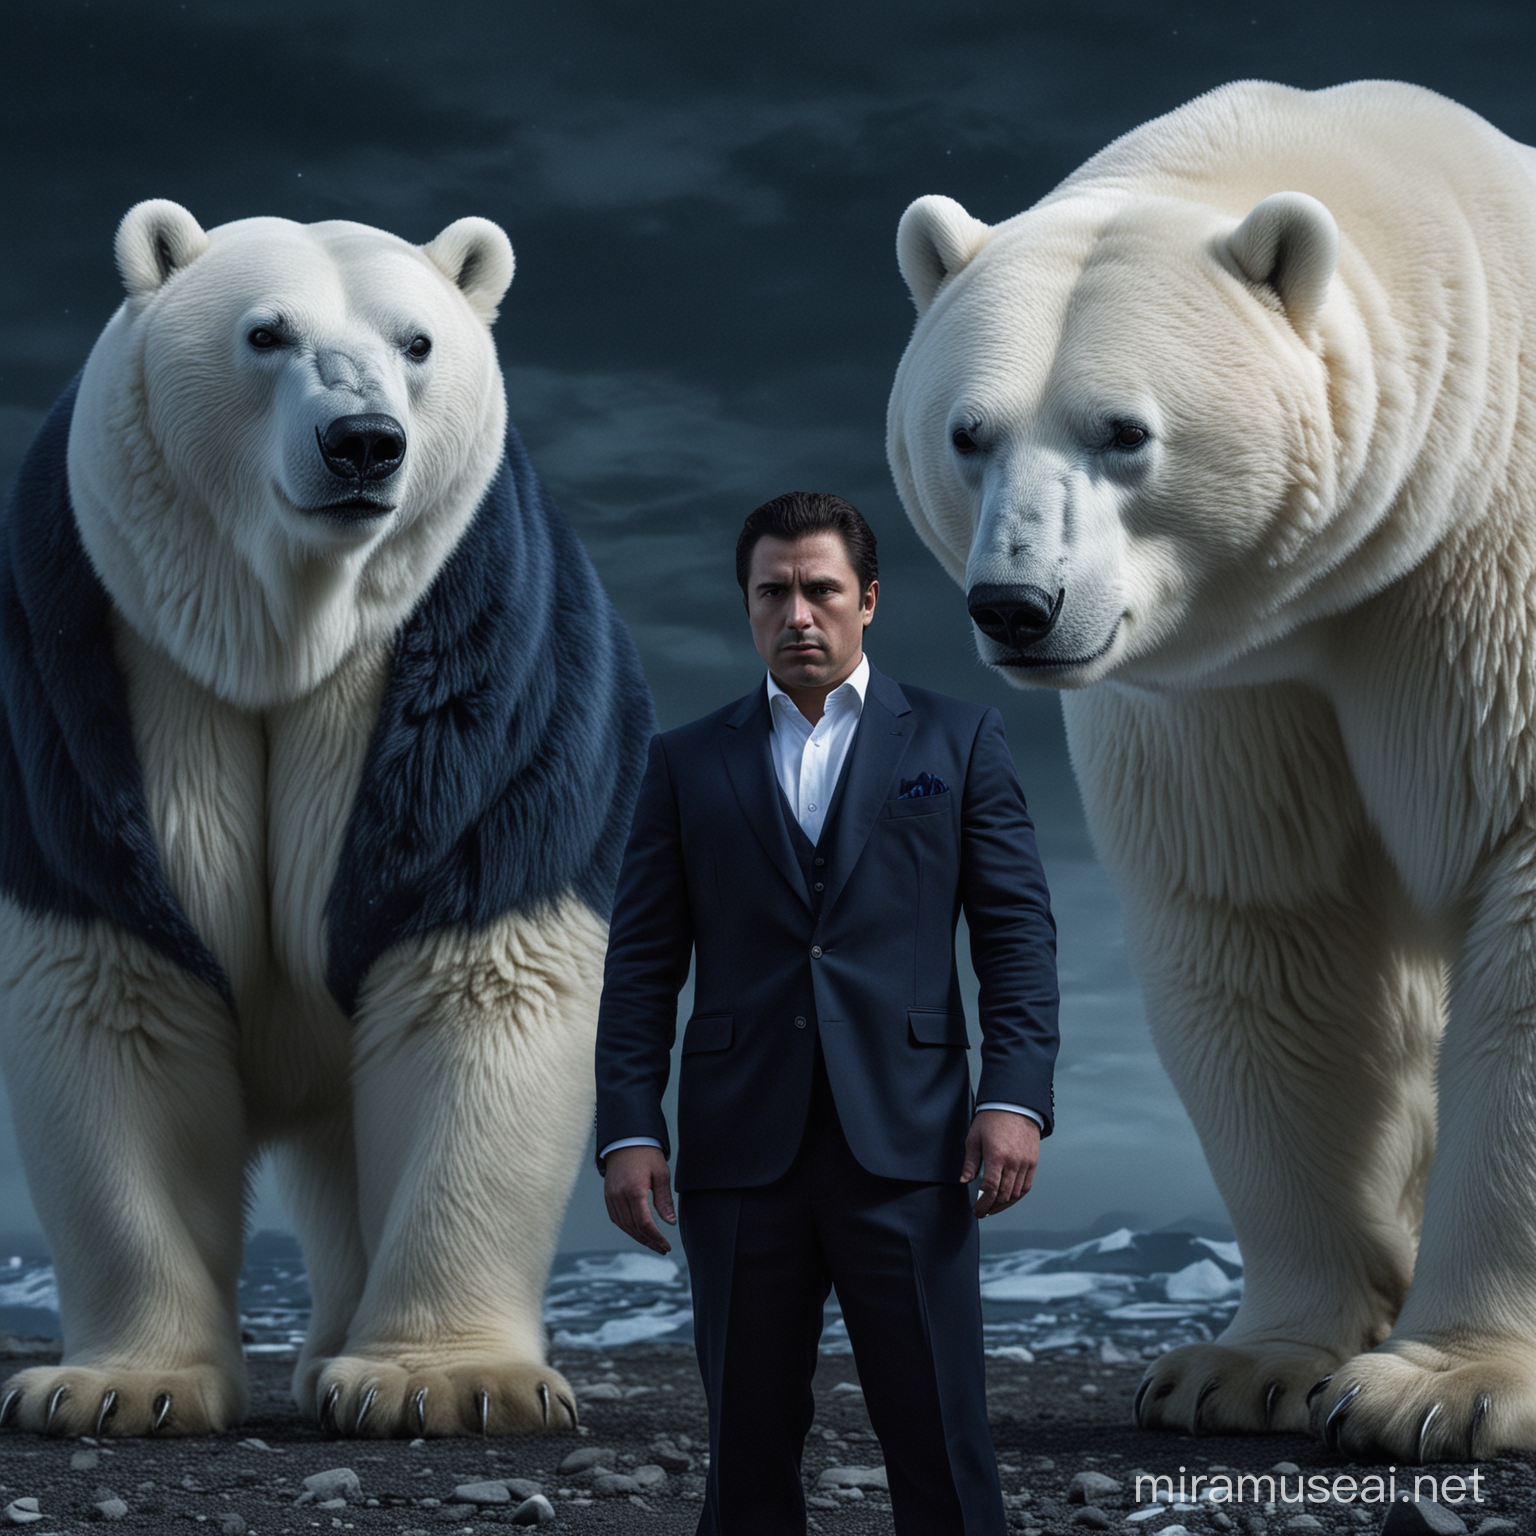 A bulked mascular man dressed in a navy blue blazer, he stands firm with a polar bear by his side in  the cold outskirts of Antarctica, he shows seriousness in his eyes, image is taken during a dark night with only blue moonlight shining over the scene, 